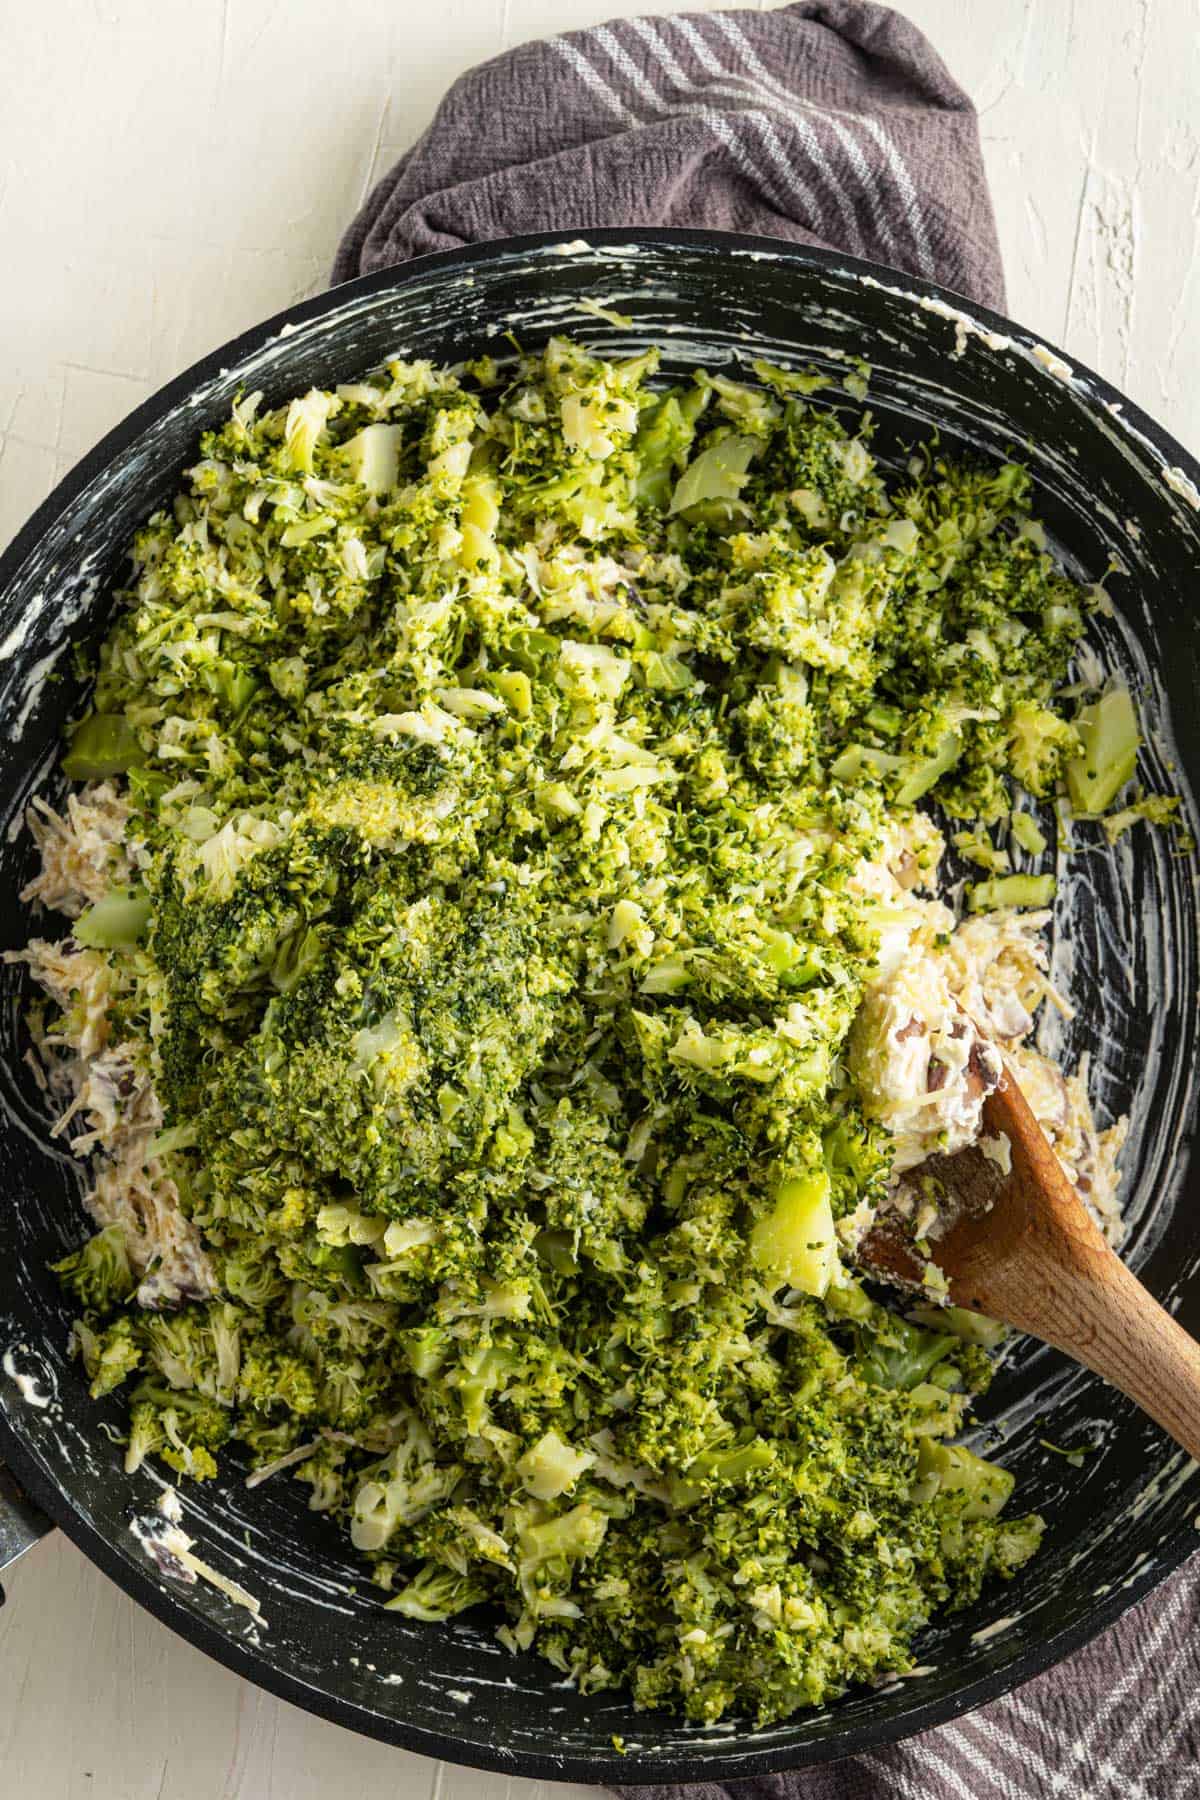 Mixing finely chopped broccoli with cheese in a pan.